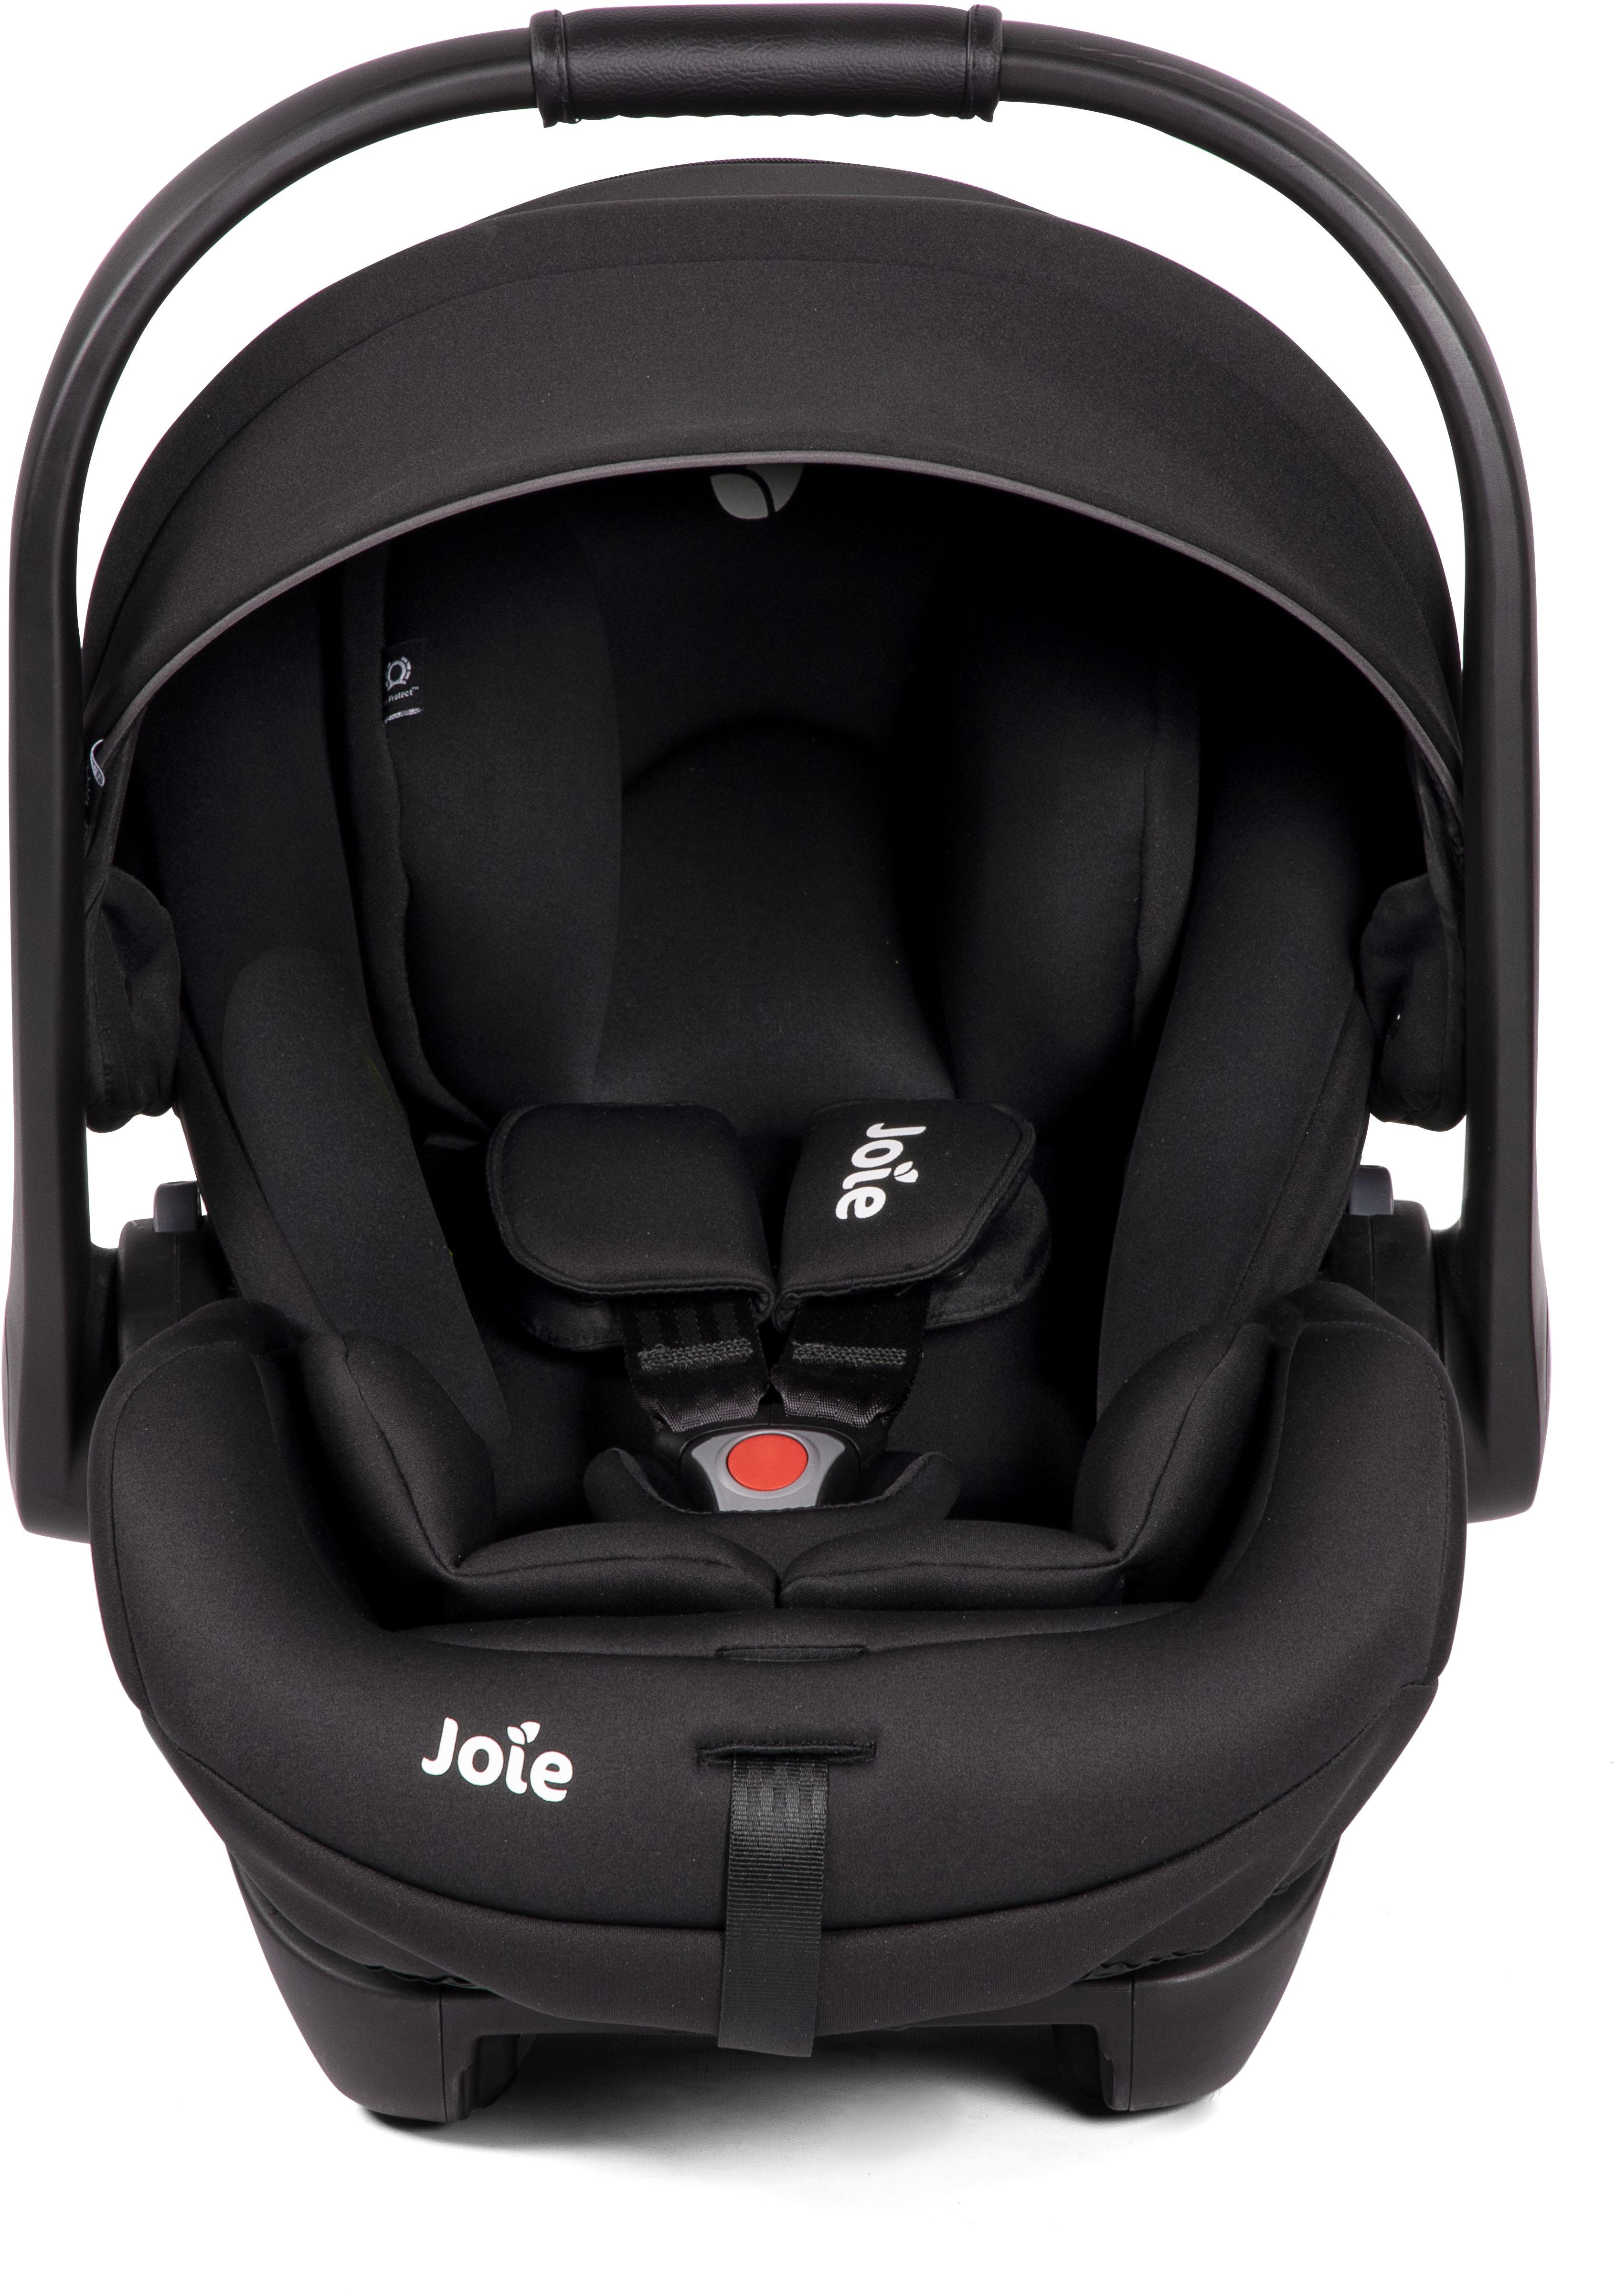 Joie Baby i-Level Group 0+ Baby Car Seat, Coal